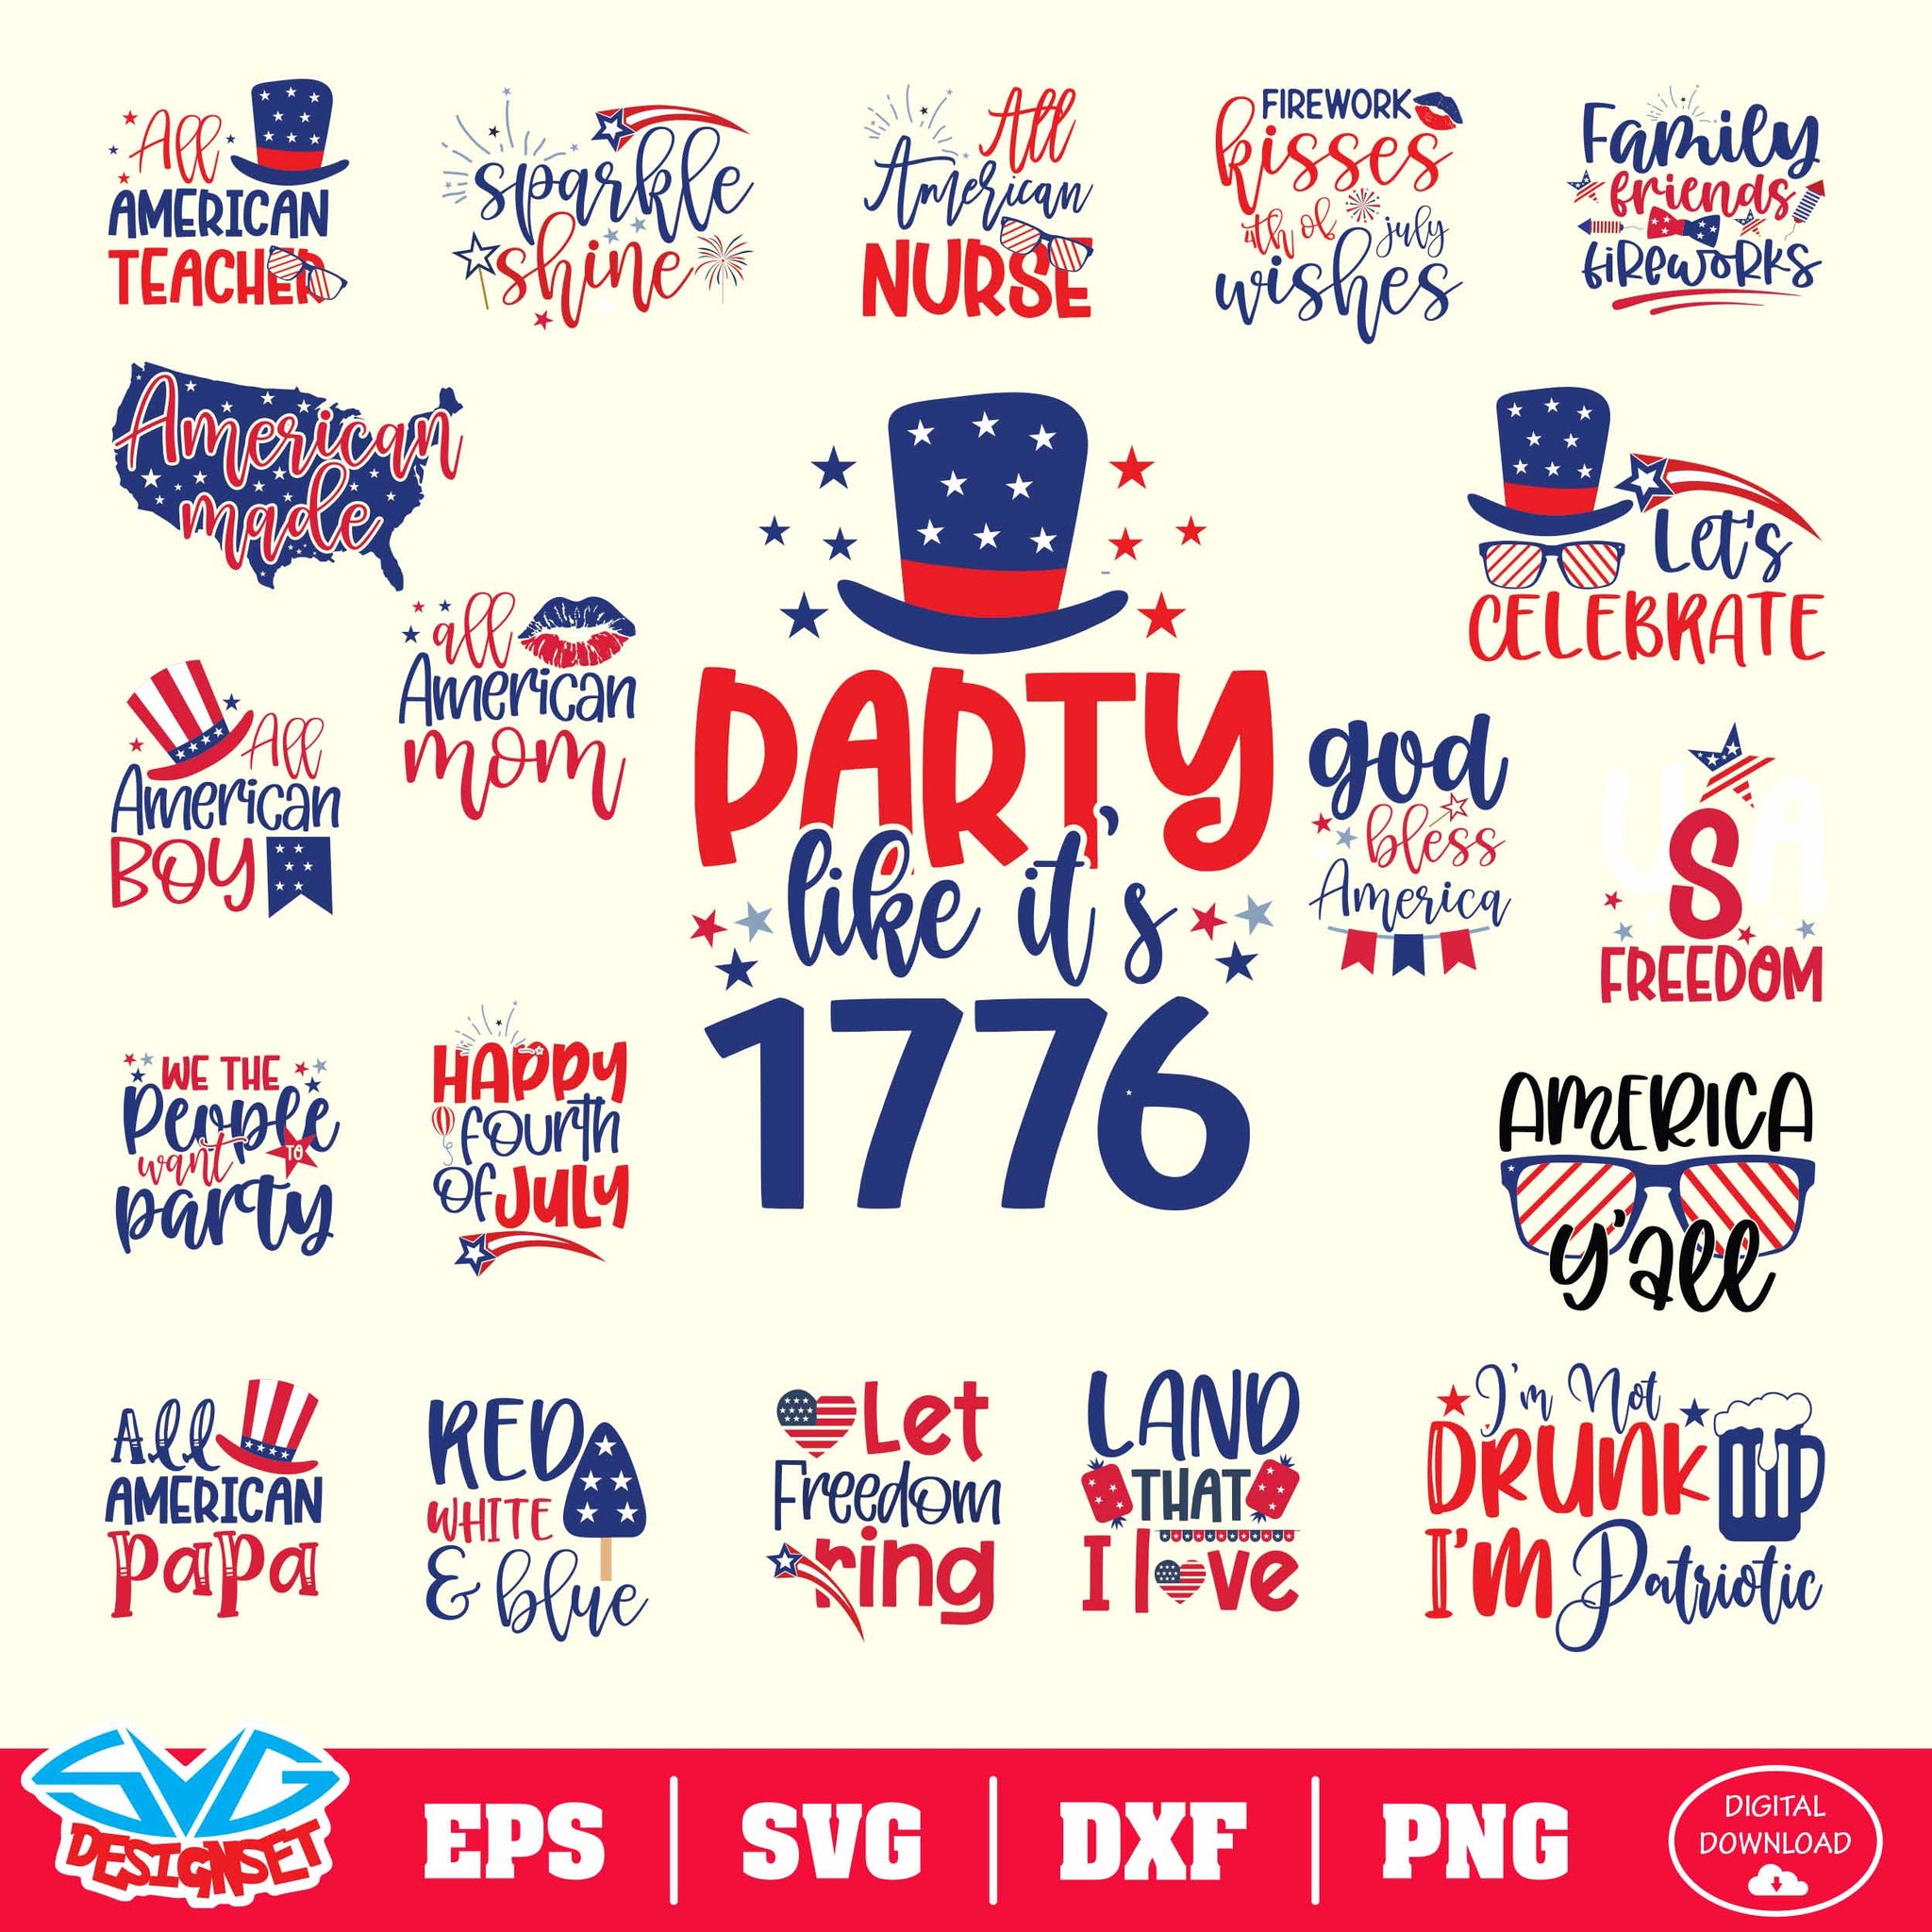 Fourth of July Svg, Dxf, Eps, Png, Clipart, Silhouette and Cutfiles #20 - SVGDesignSets